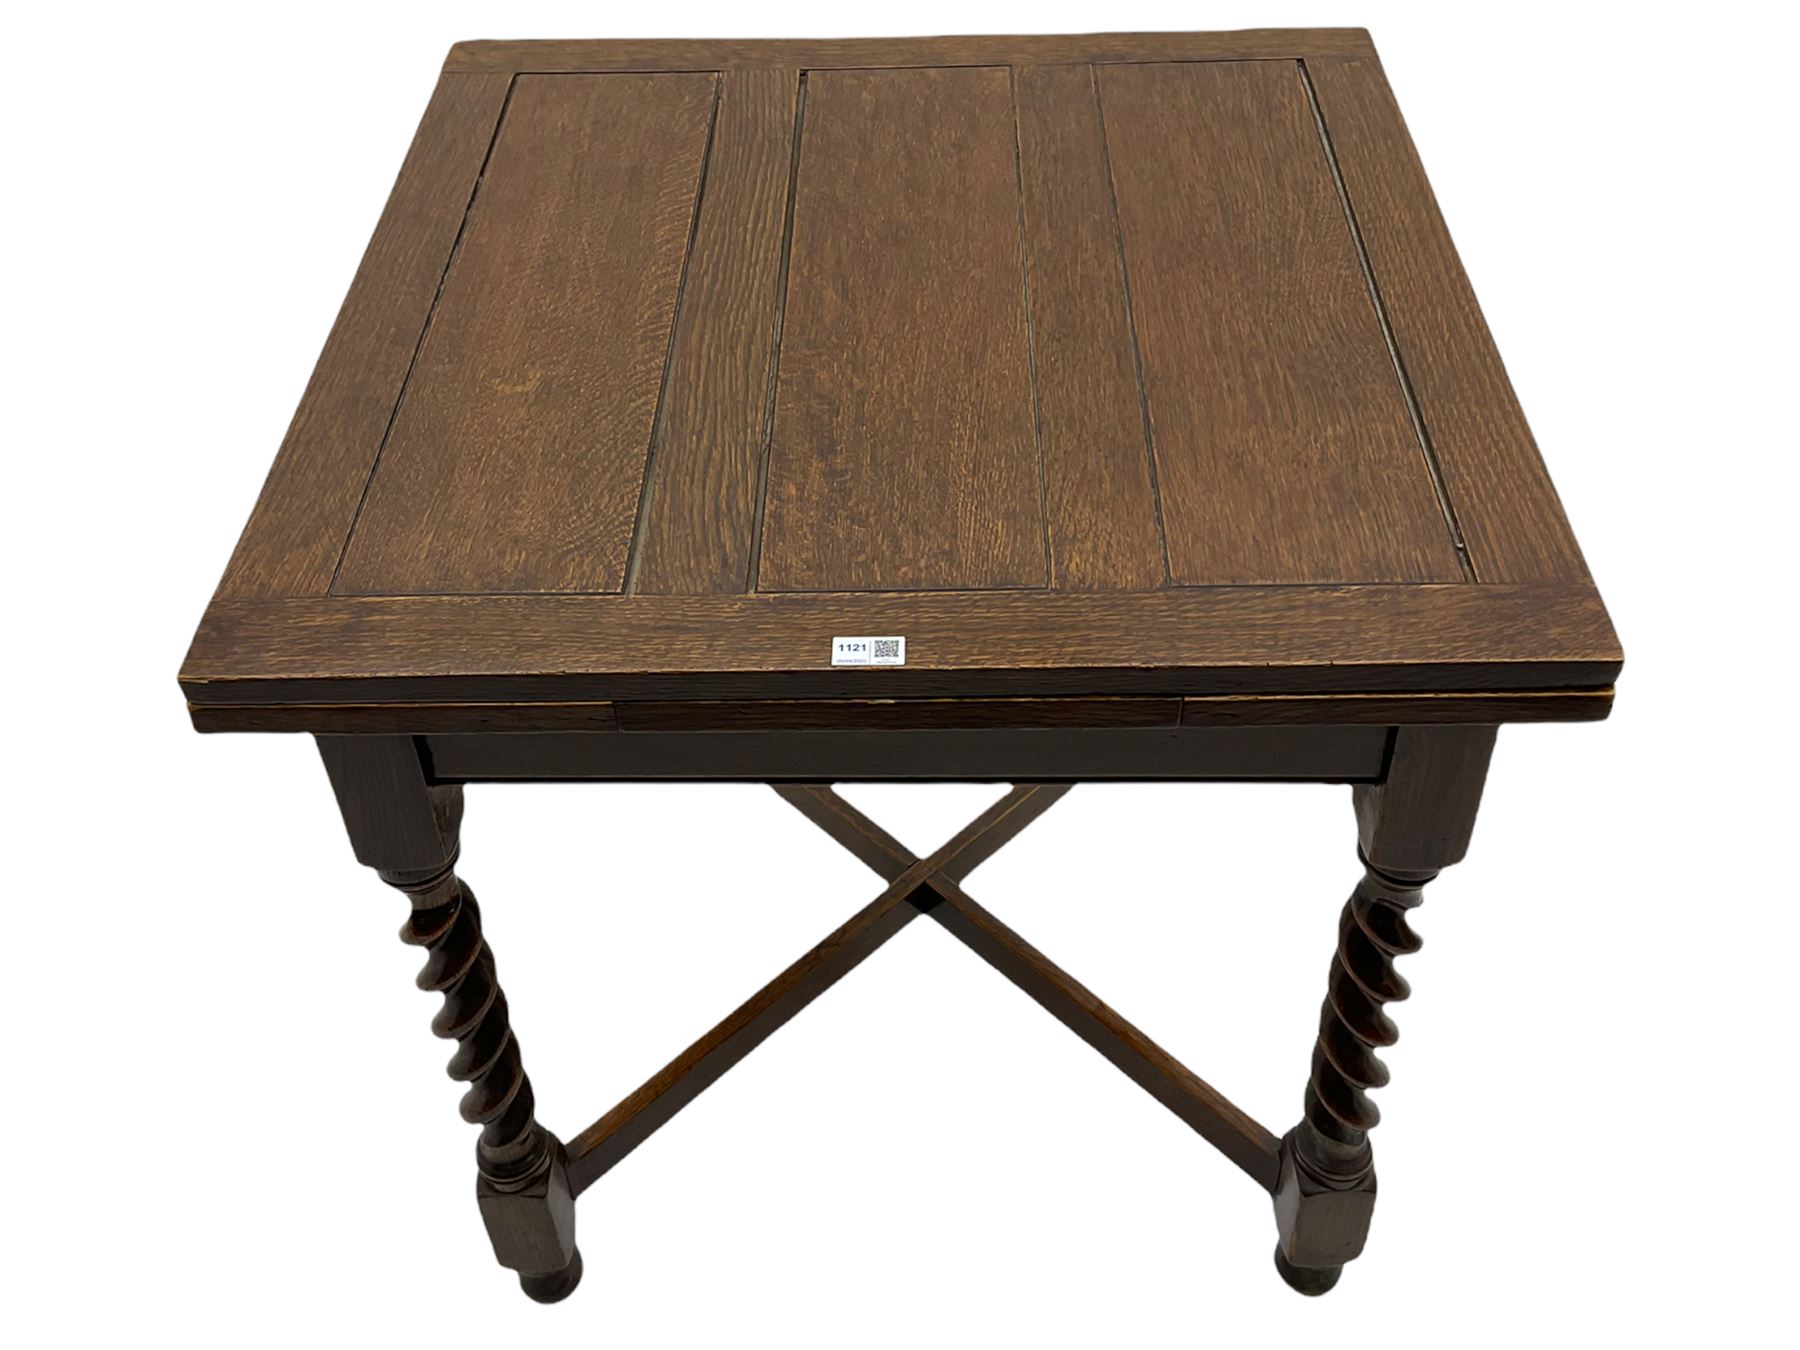 Early 20th century oak barley twist drawer leaf dining table - Image 5 of 10